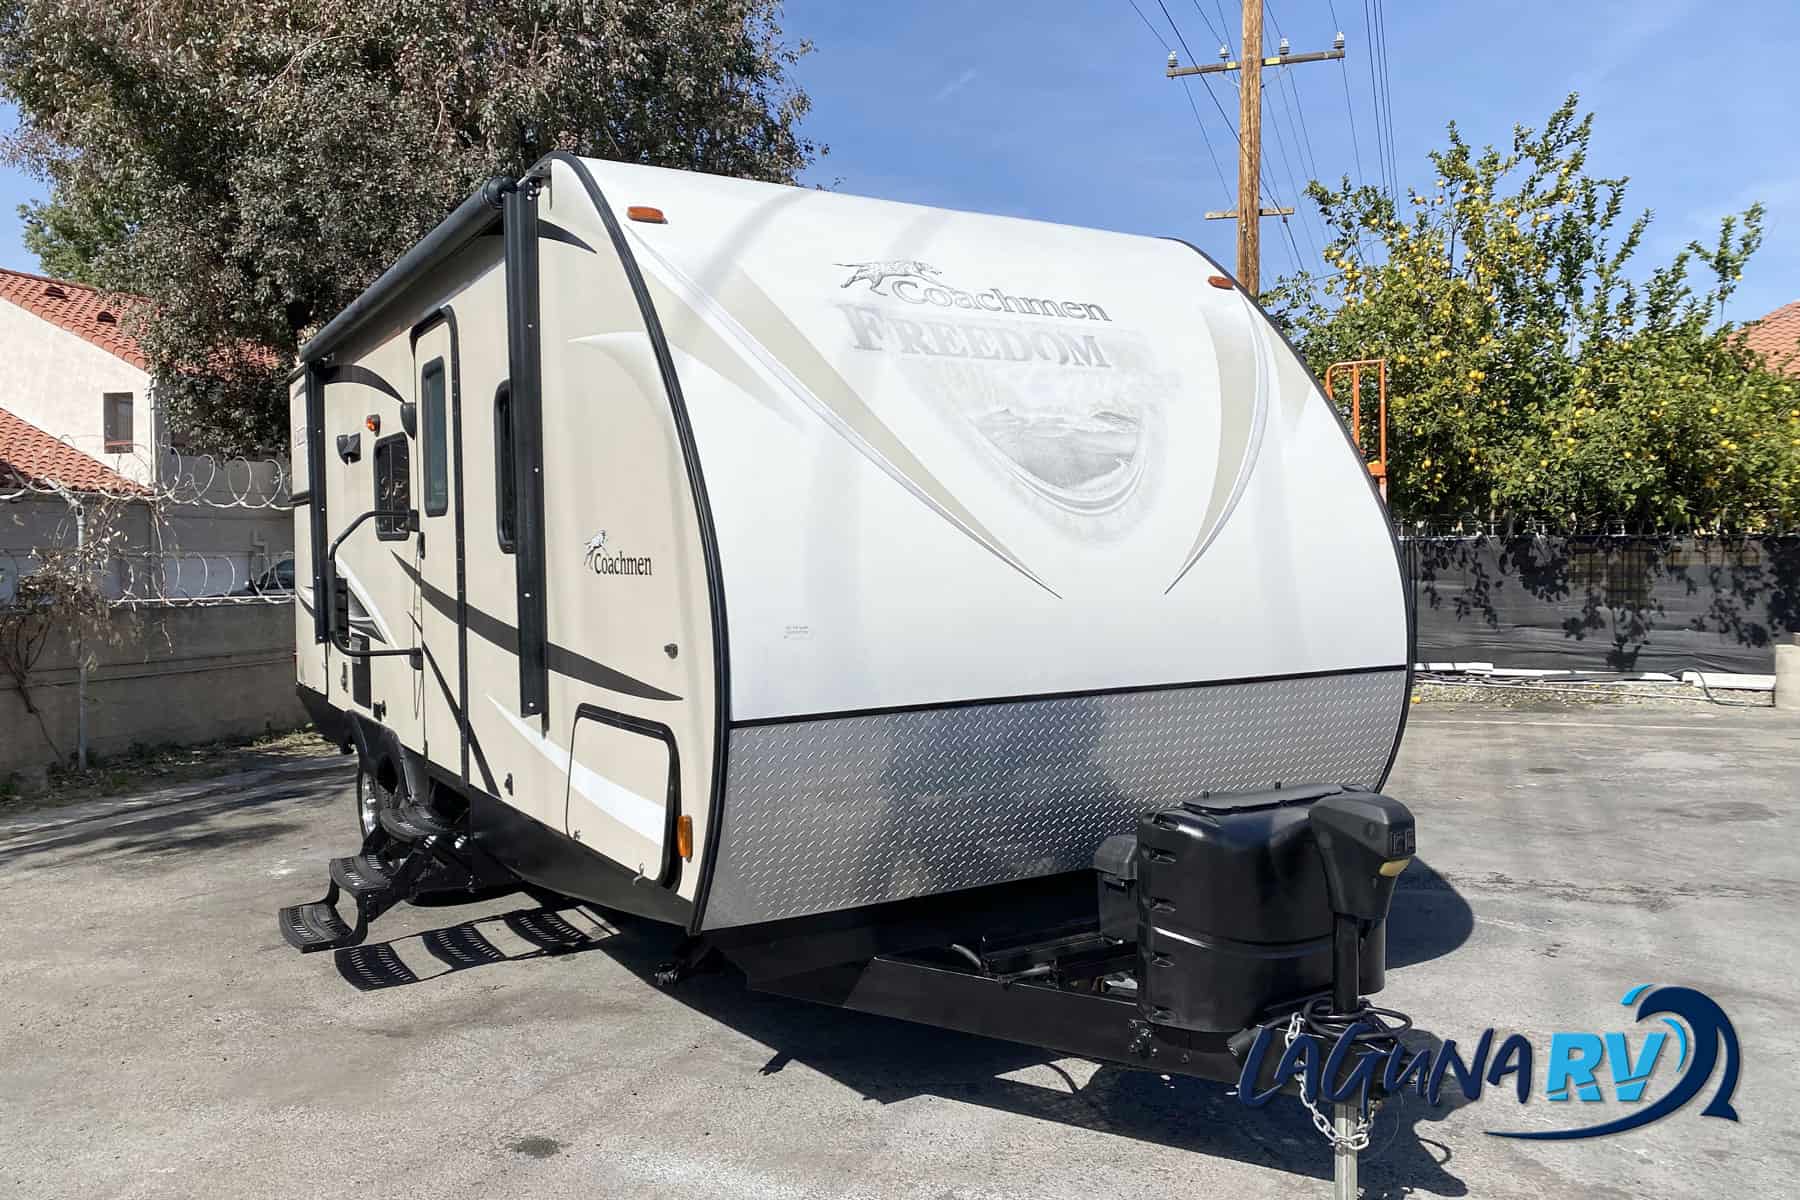 coachmen freedom express travel trailers for sale